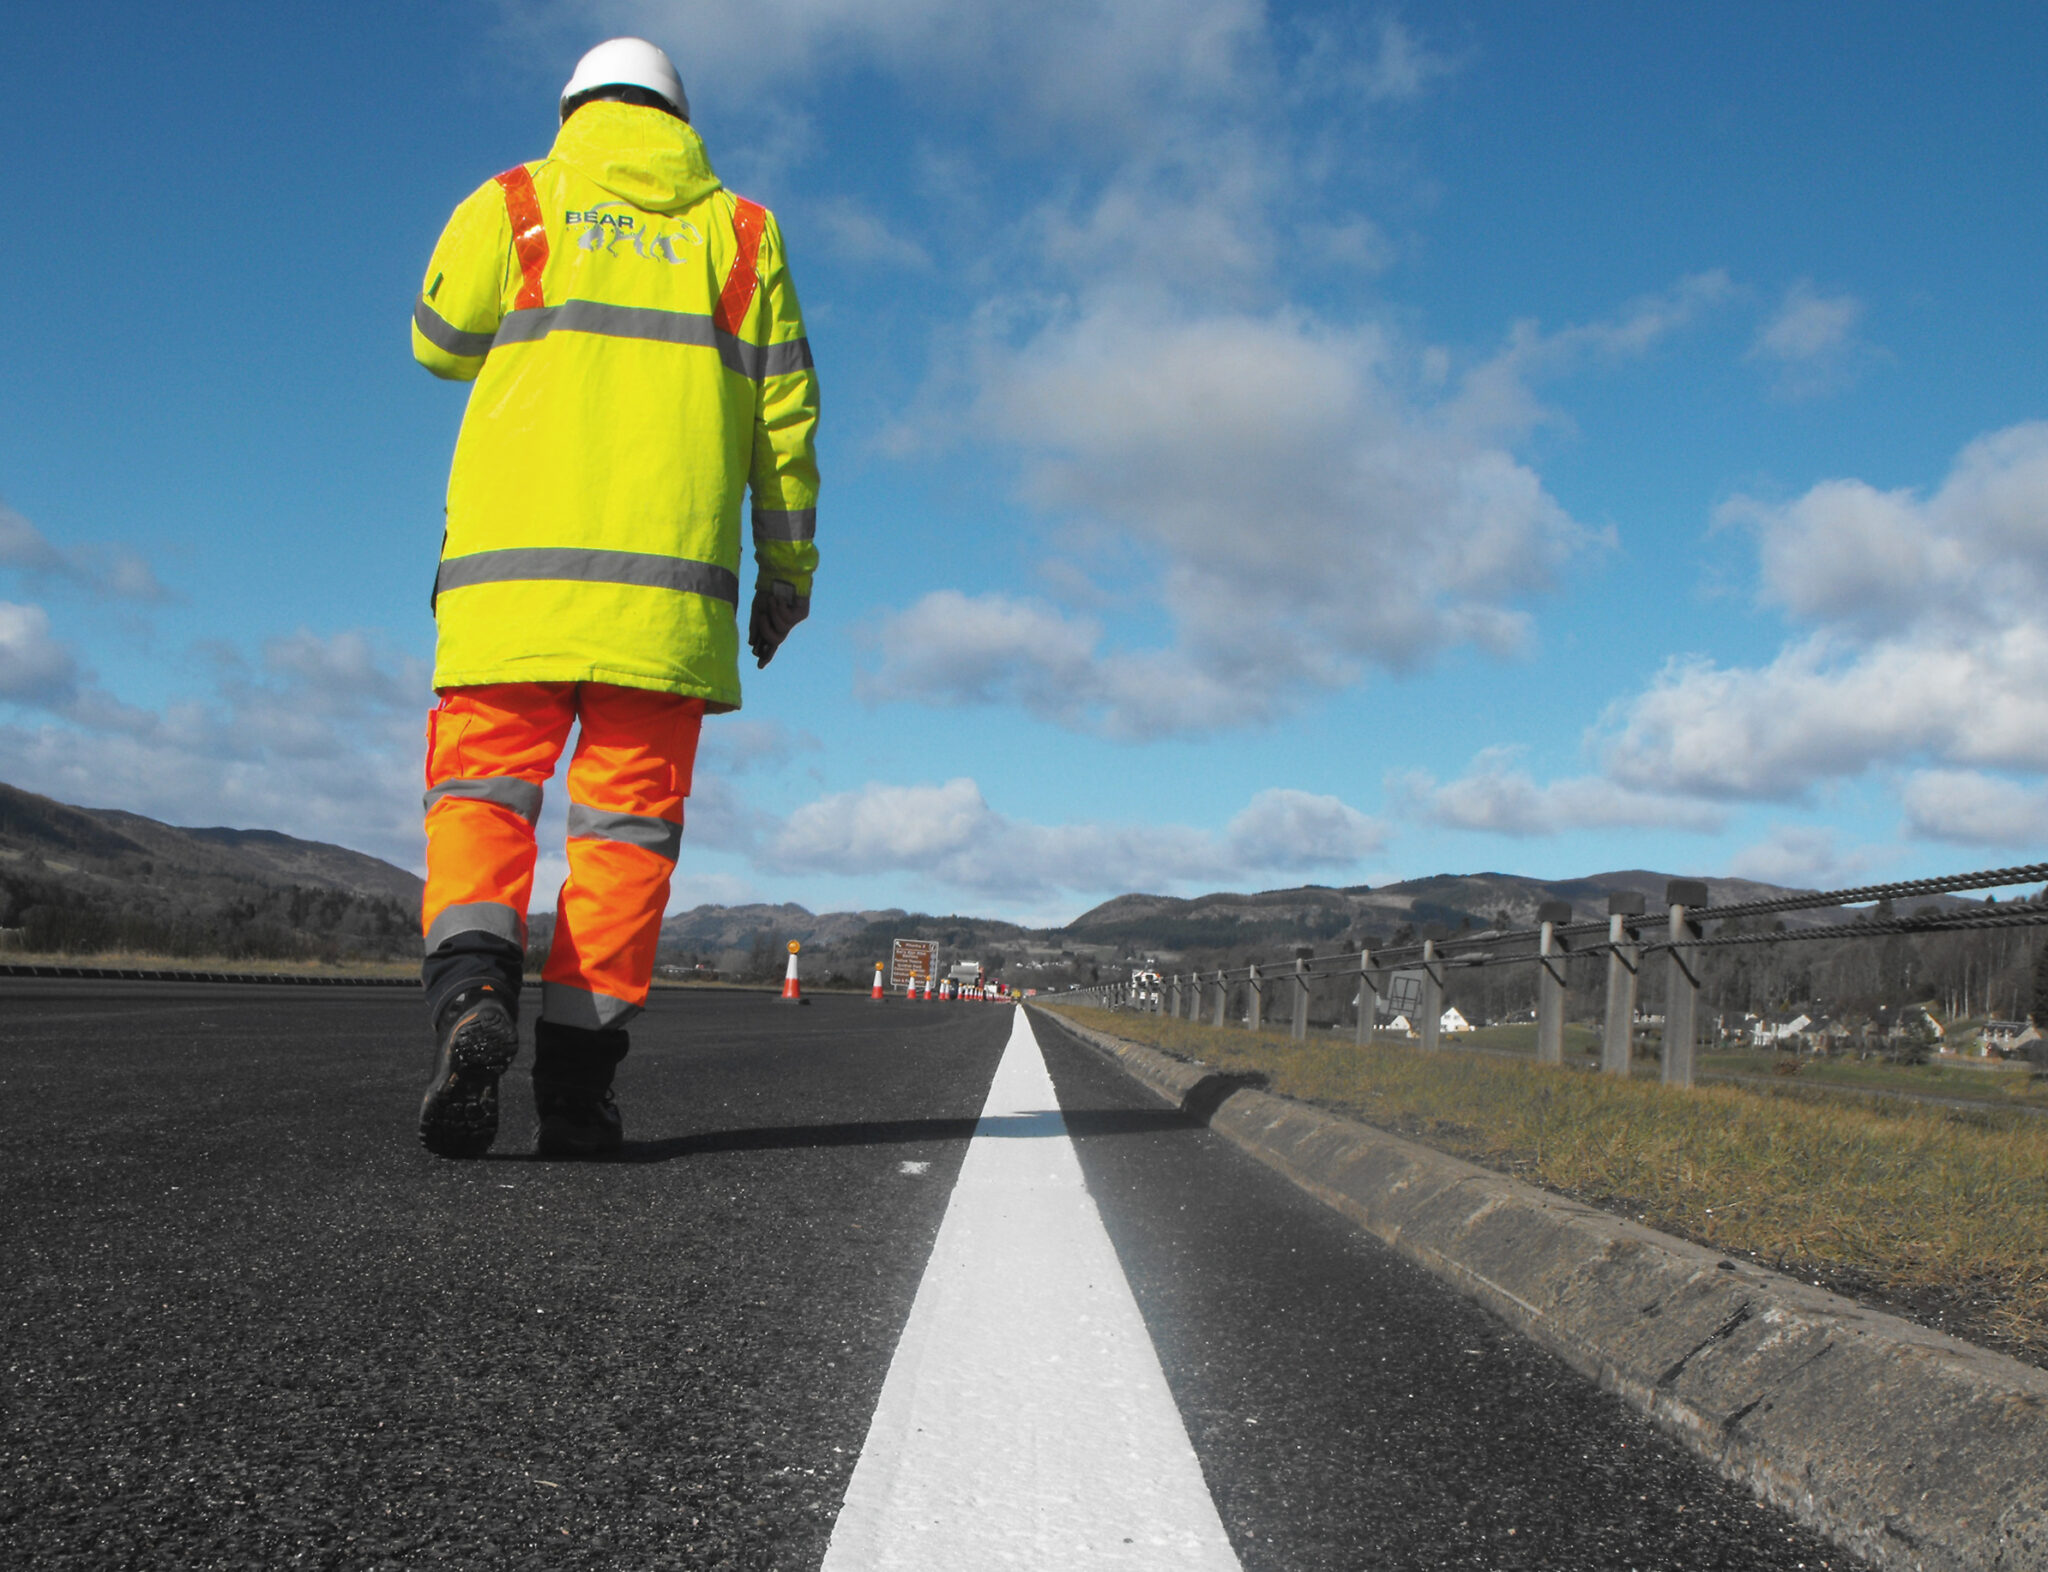 £470,000 OVERNIGHT SURFACING IMPROVEMENTS PLANNED ON THE A82 ADJACENT TO LOCH LOMOND